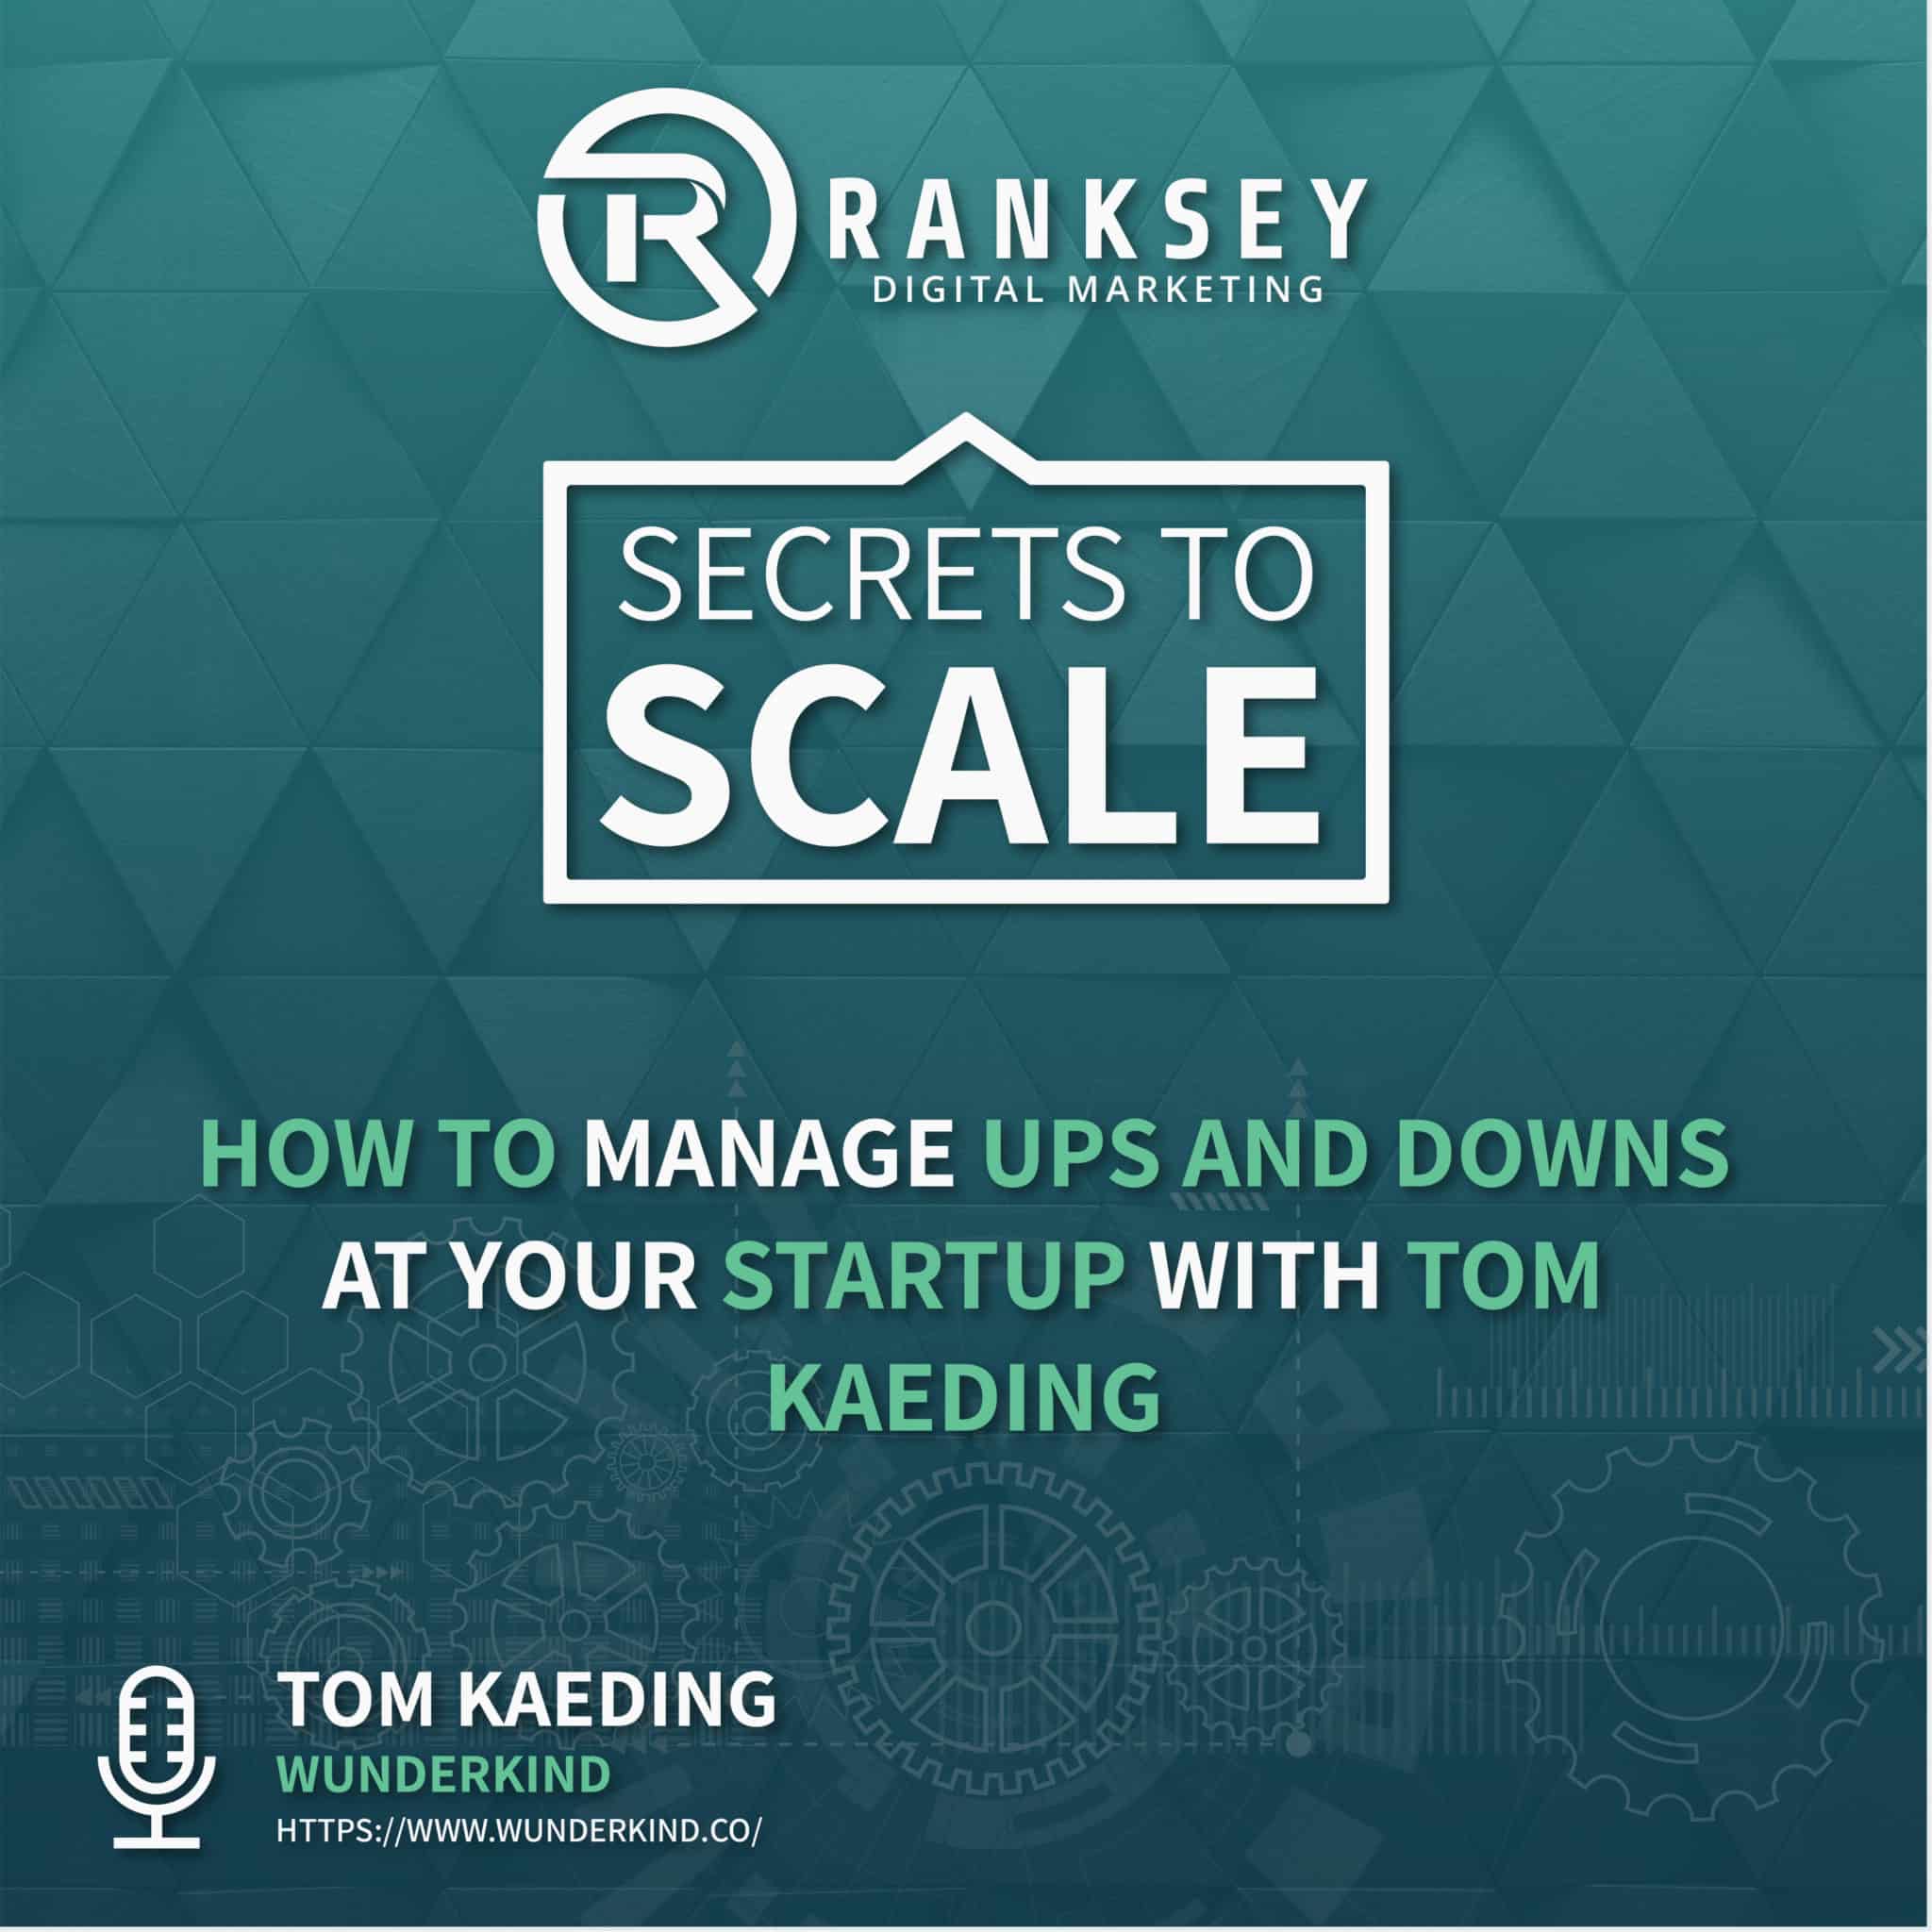 066 - How To Manage Ups And Downs At Your Startup